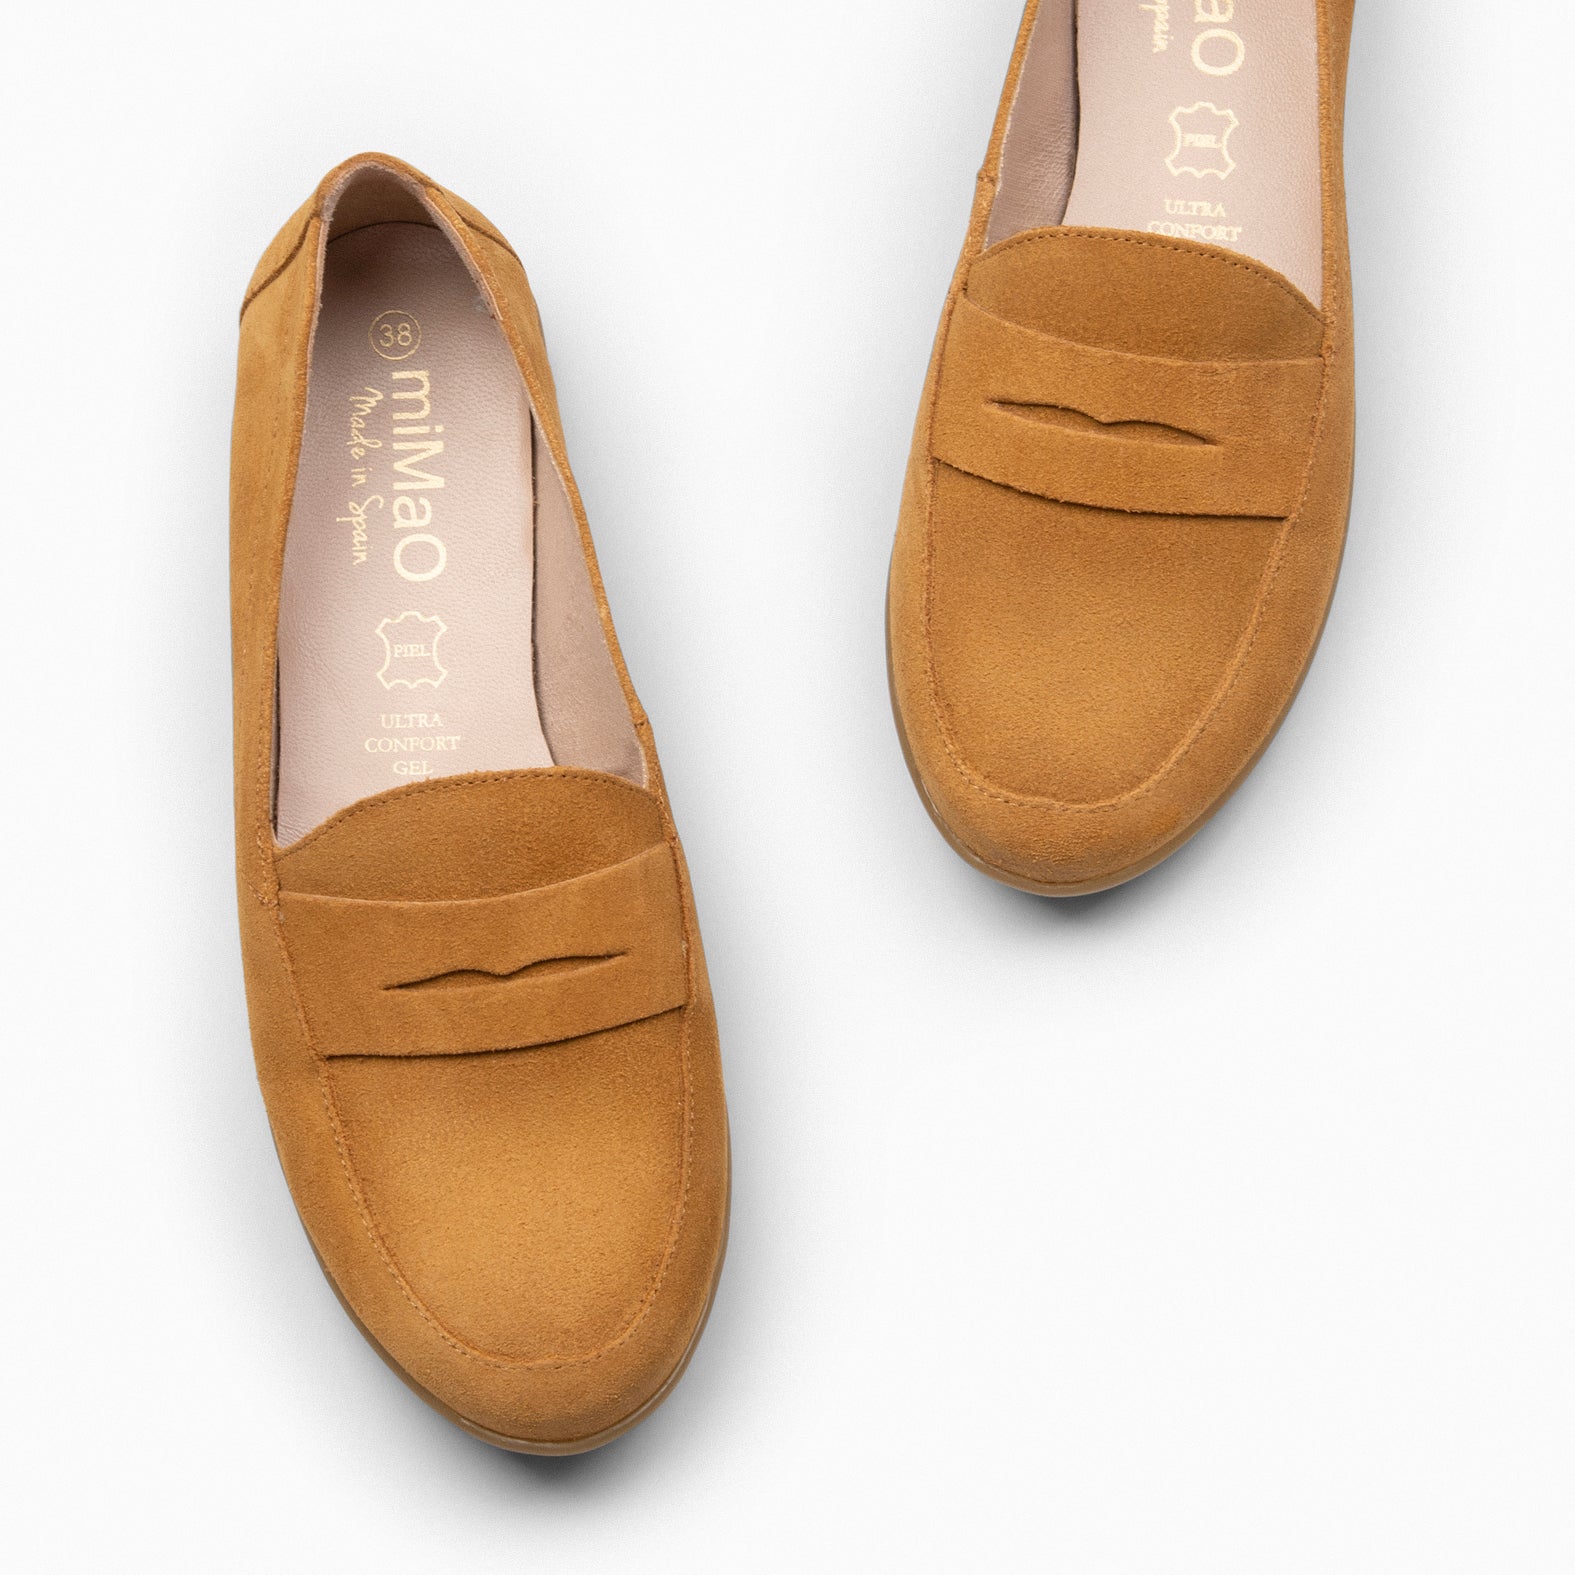 360 – CAMEL moccasins with mask